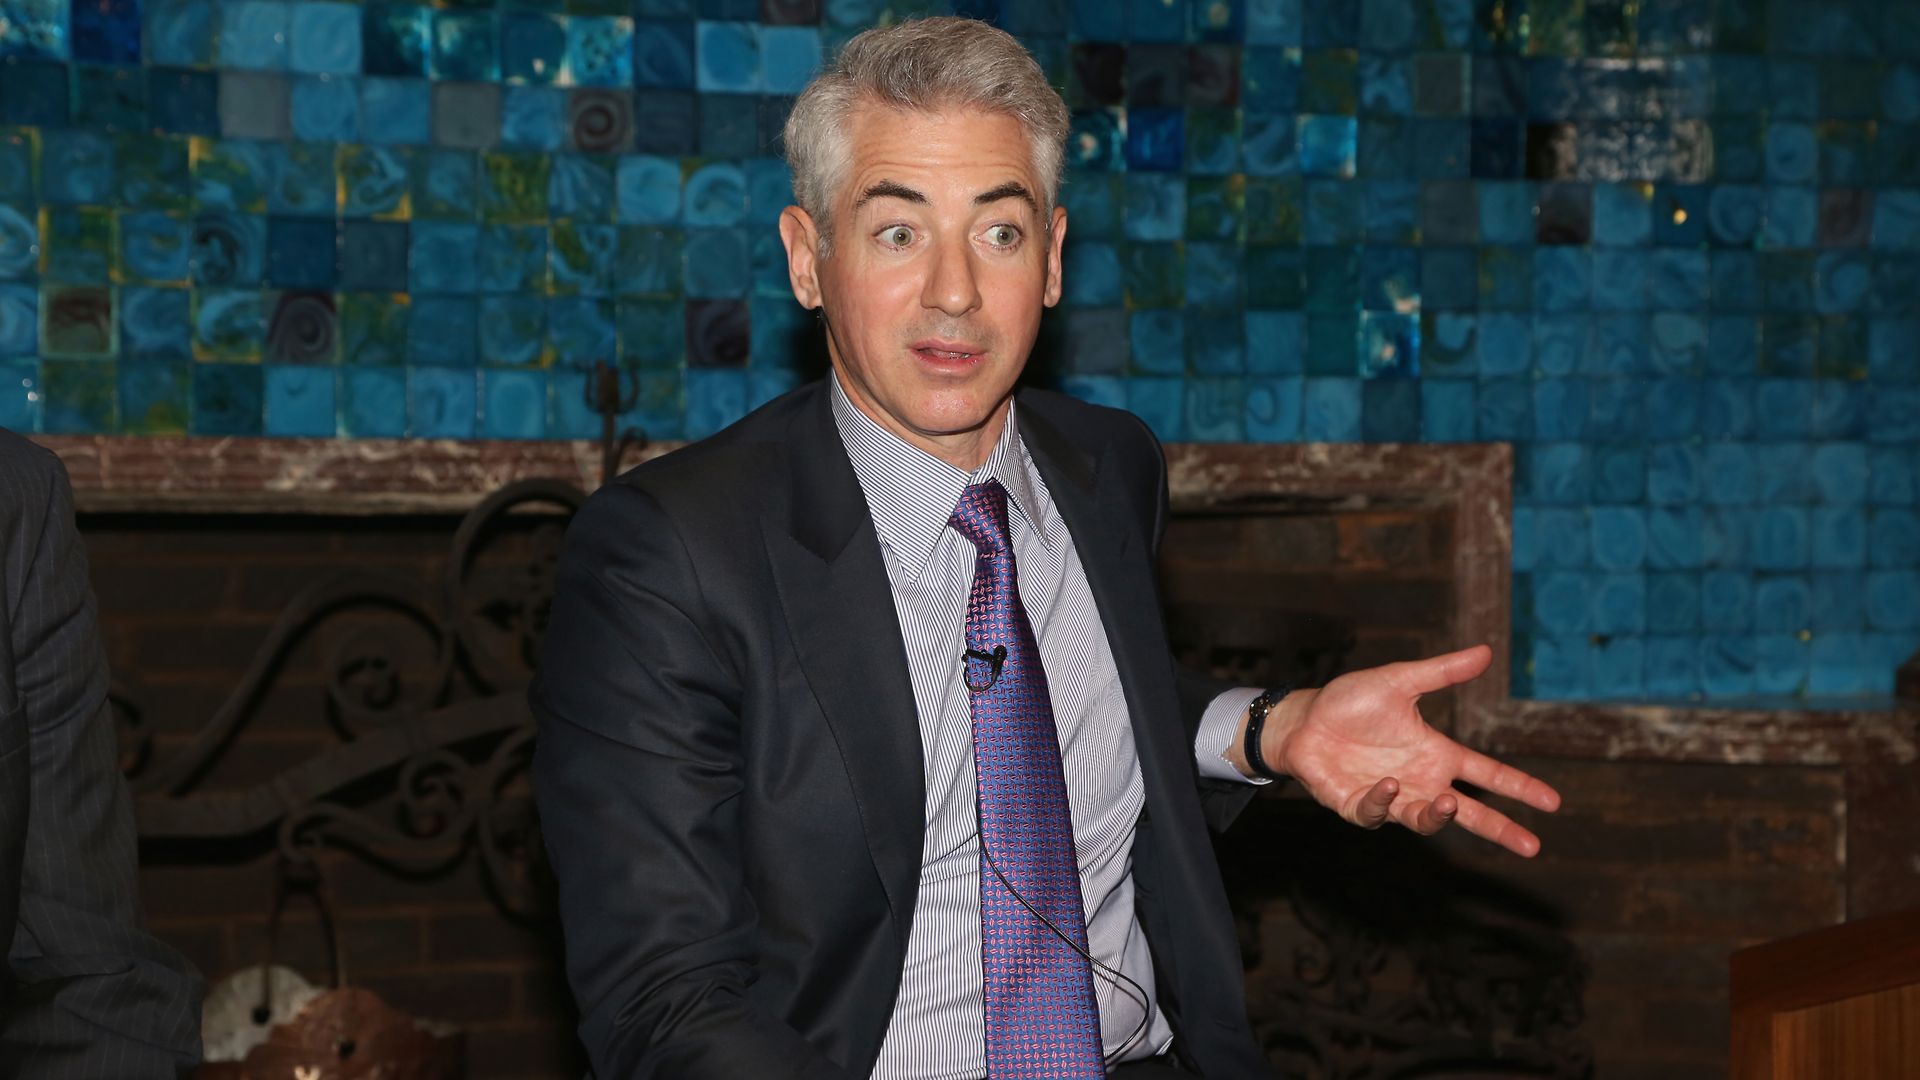 In this image, Ackman sits and talks while gesturing with one hand and wearing a suit and tie.